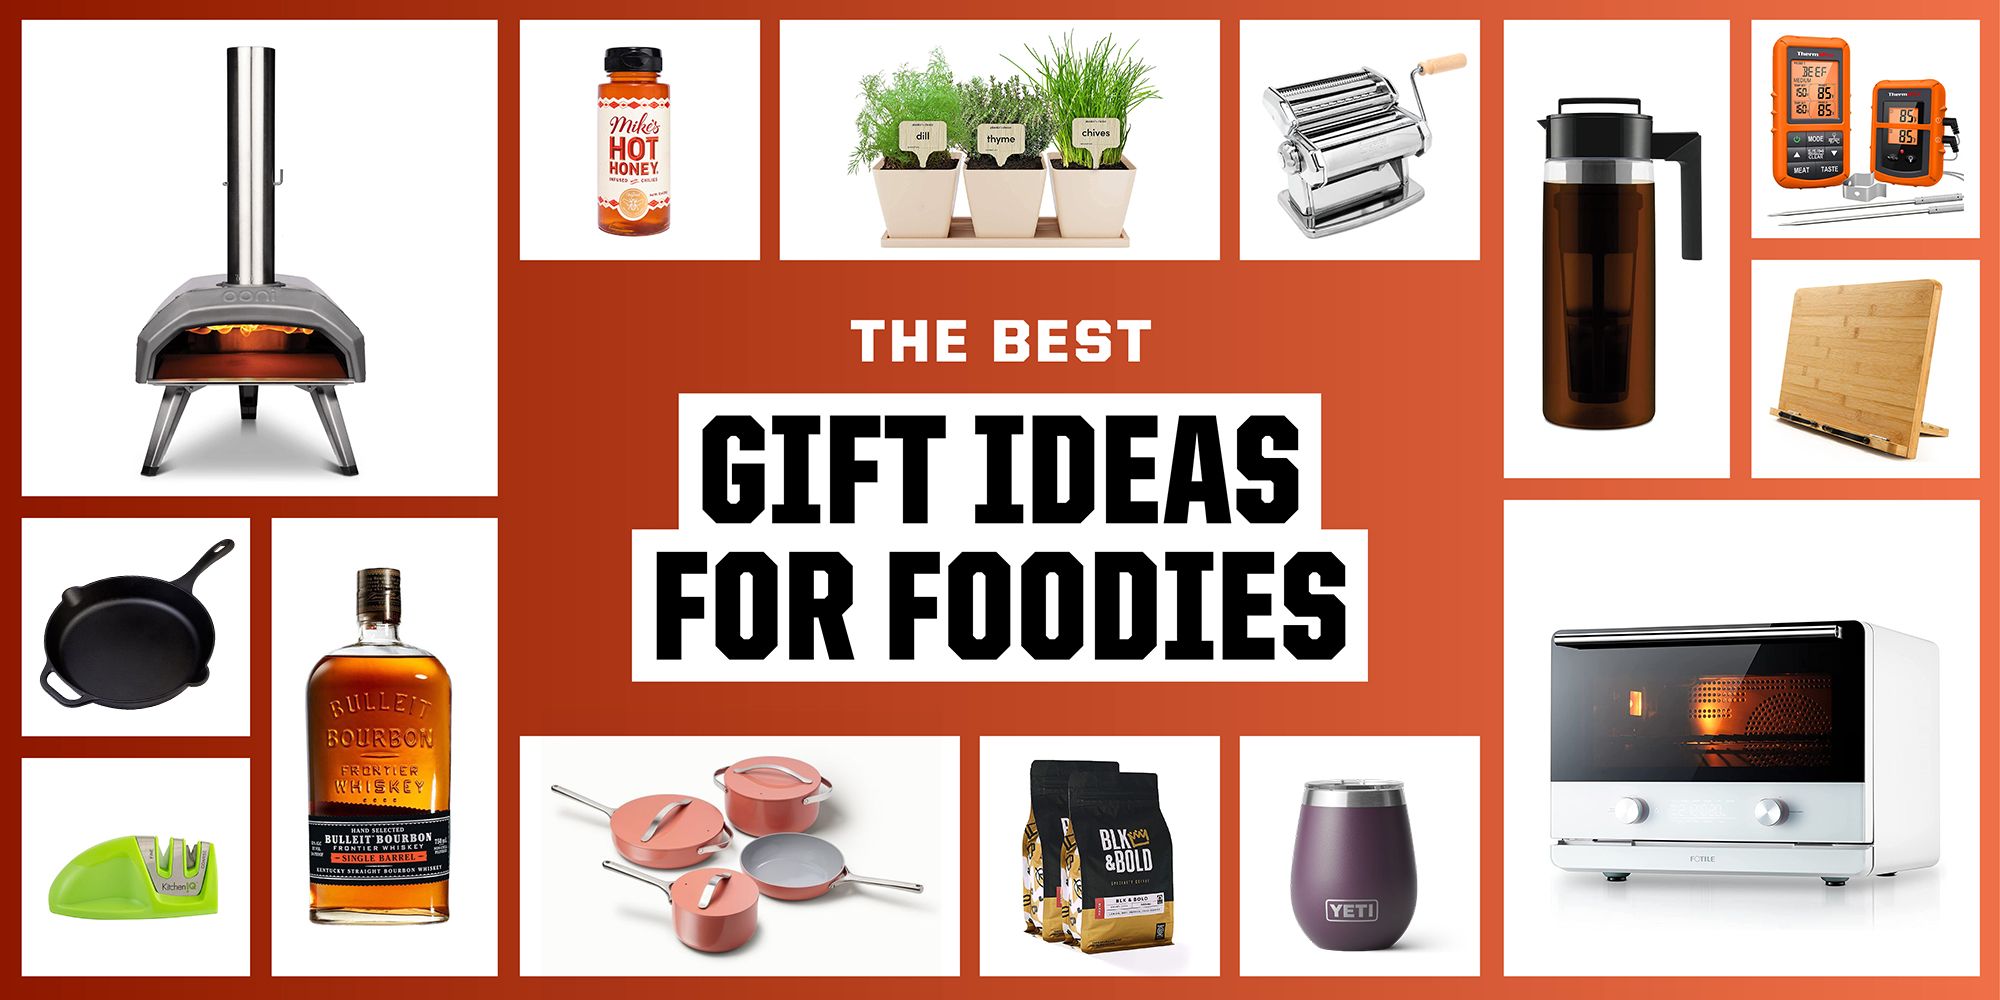 21 Kitchen Gadget Gifts Everyone Will Love - A Food Lover's Kitchen